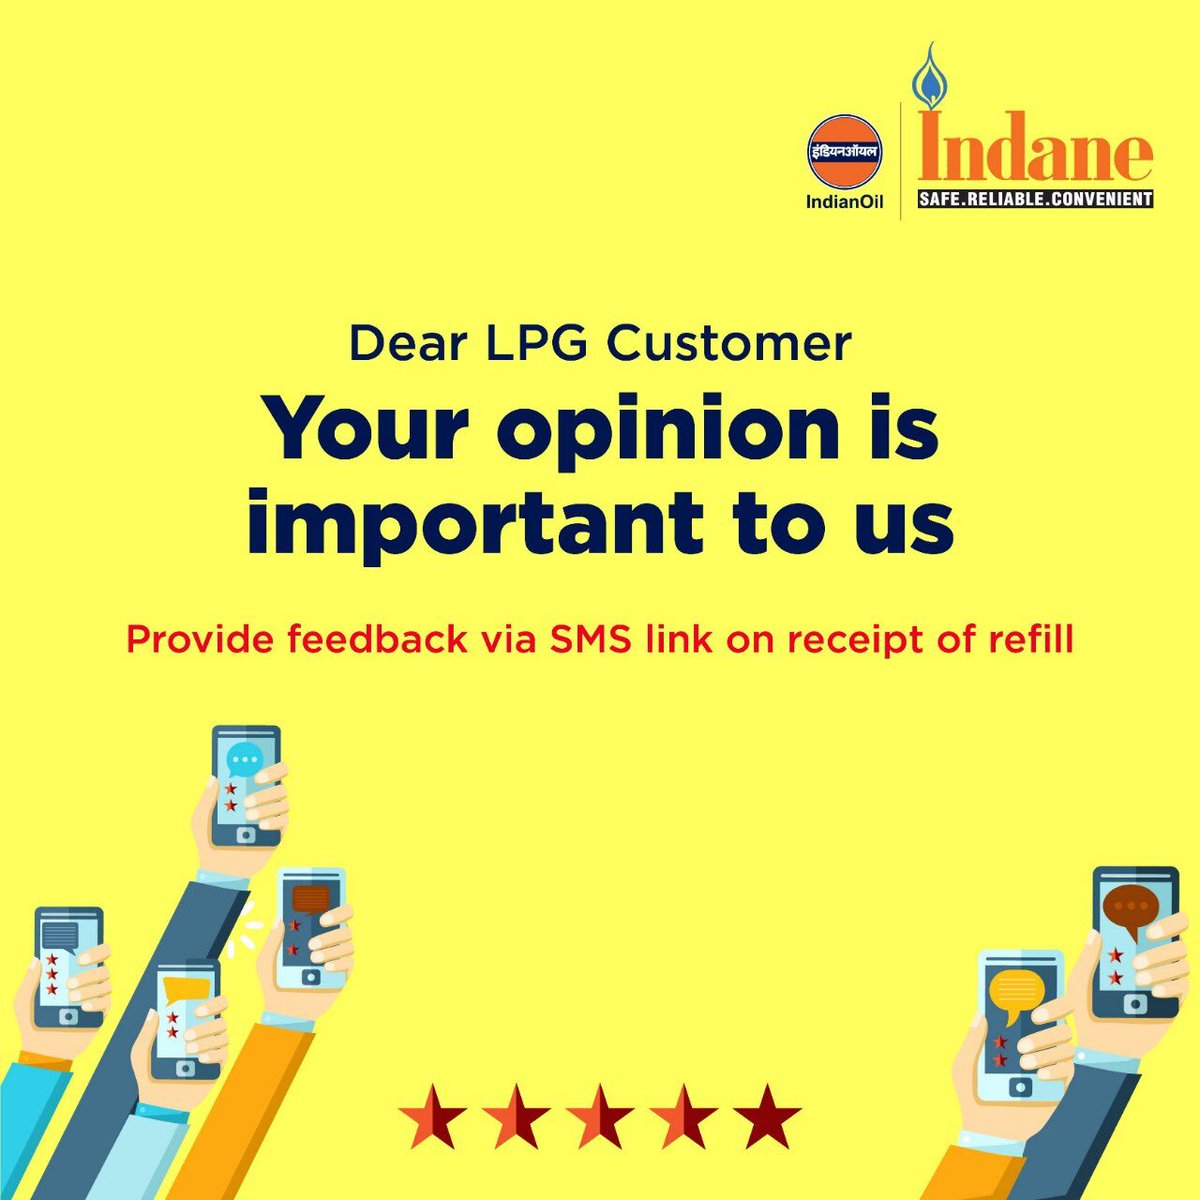 Dear #Indane customer, your feedback drives our pursuit of perfection!​

Please provide your feedback via SMS link on receipt of #LPG refill and help us serve you better.​

#IndianOil